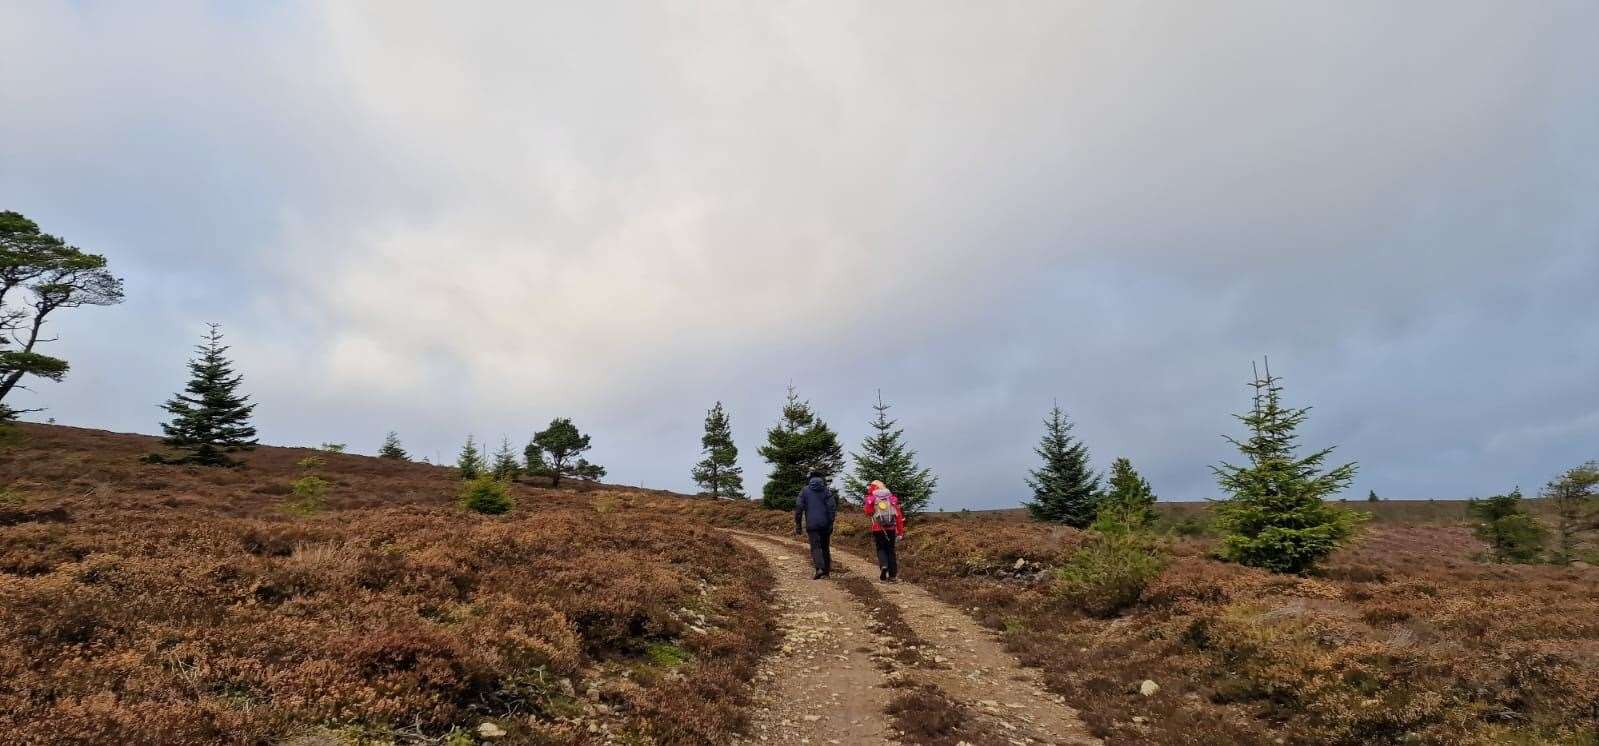 Community walking from mountain to sea forms Aberdeenshire’s contribution to the Remembering Together project.